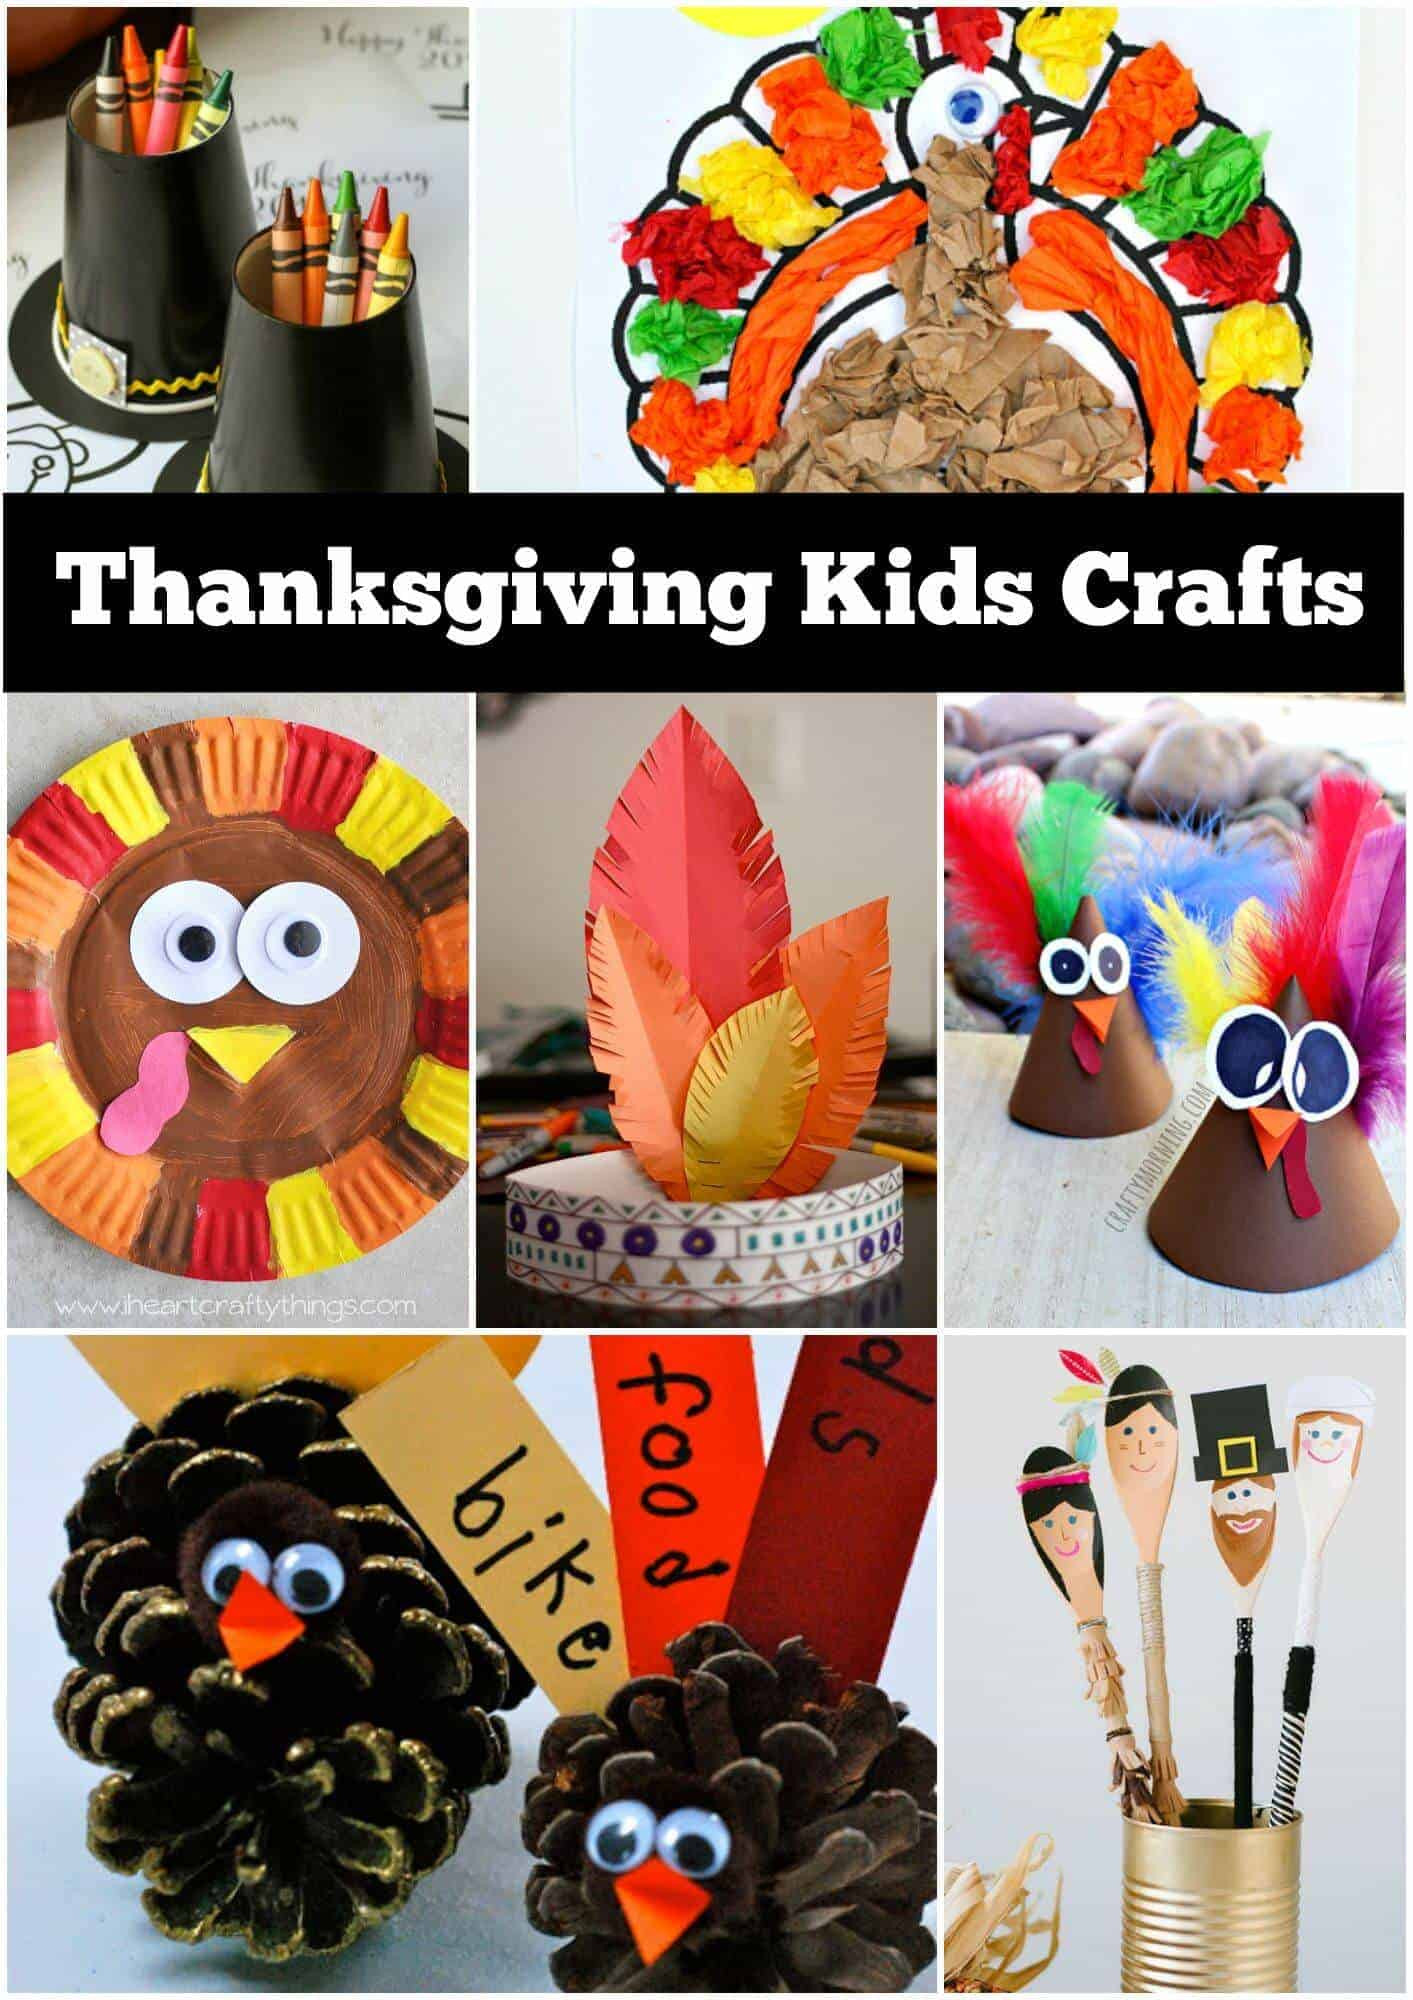 Kid Crafts Thanksgiving
 12 Thanksgiving Craft Ideas for kids Page 2 of 2